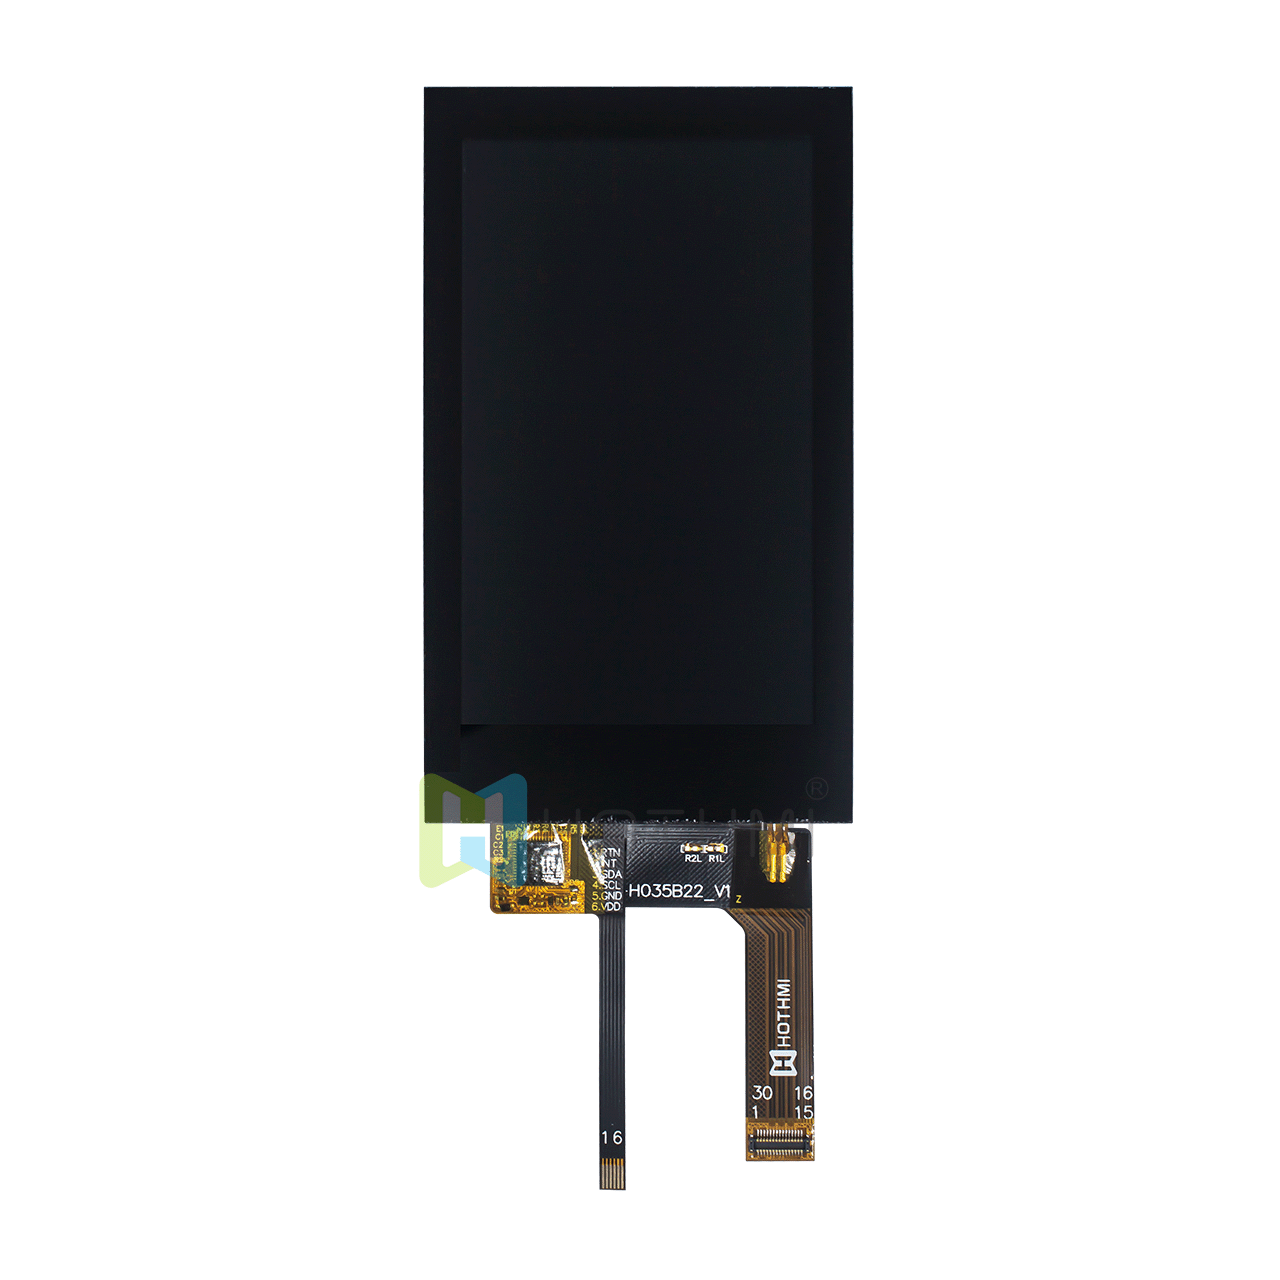 IPS 3.5-inch TFT LCD display module/480x800 pixels/ST7701S/capacitive touch/MIPI interface/3.3V/compatible with Android